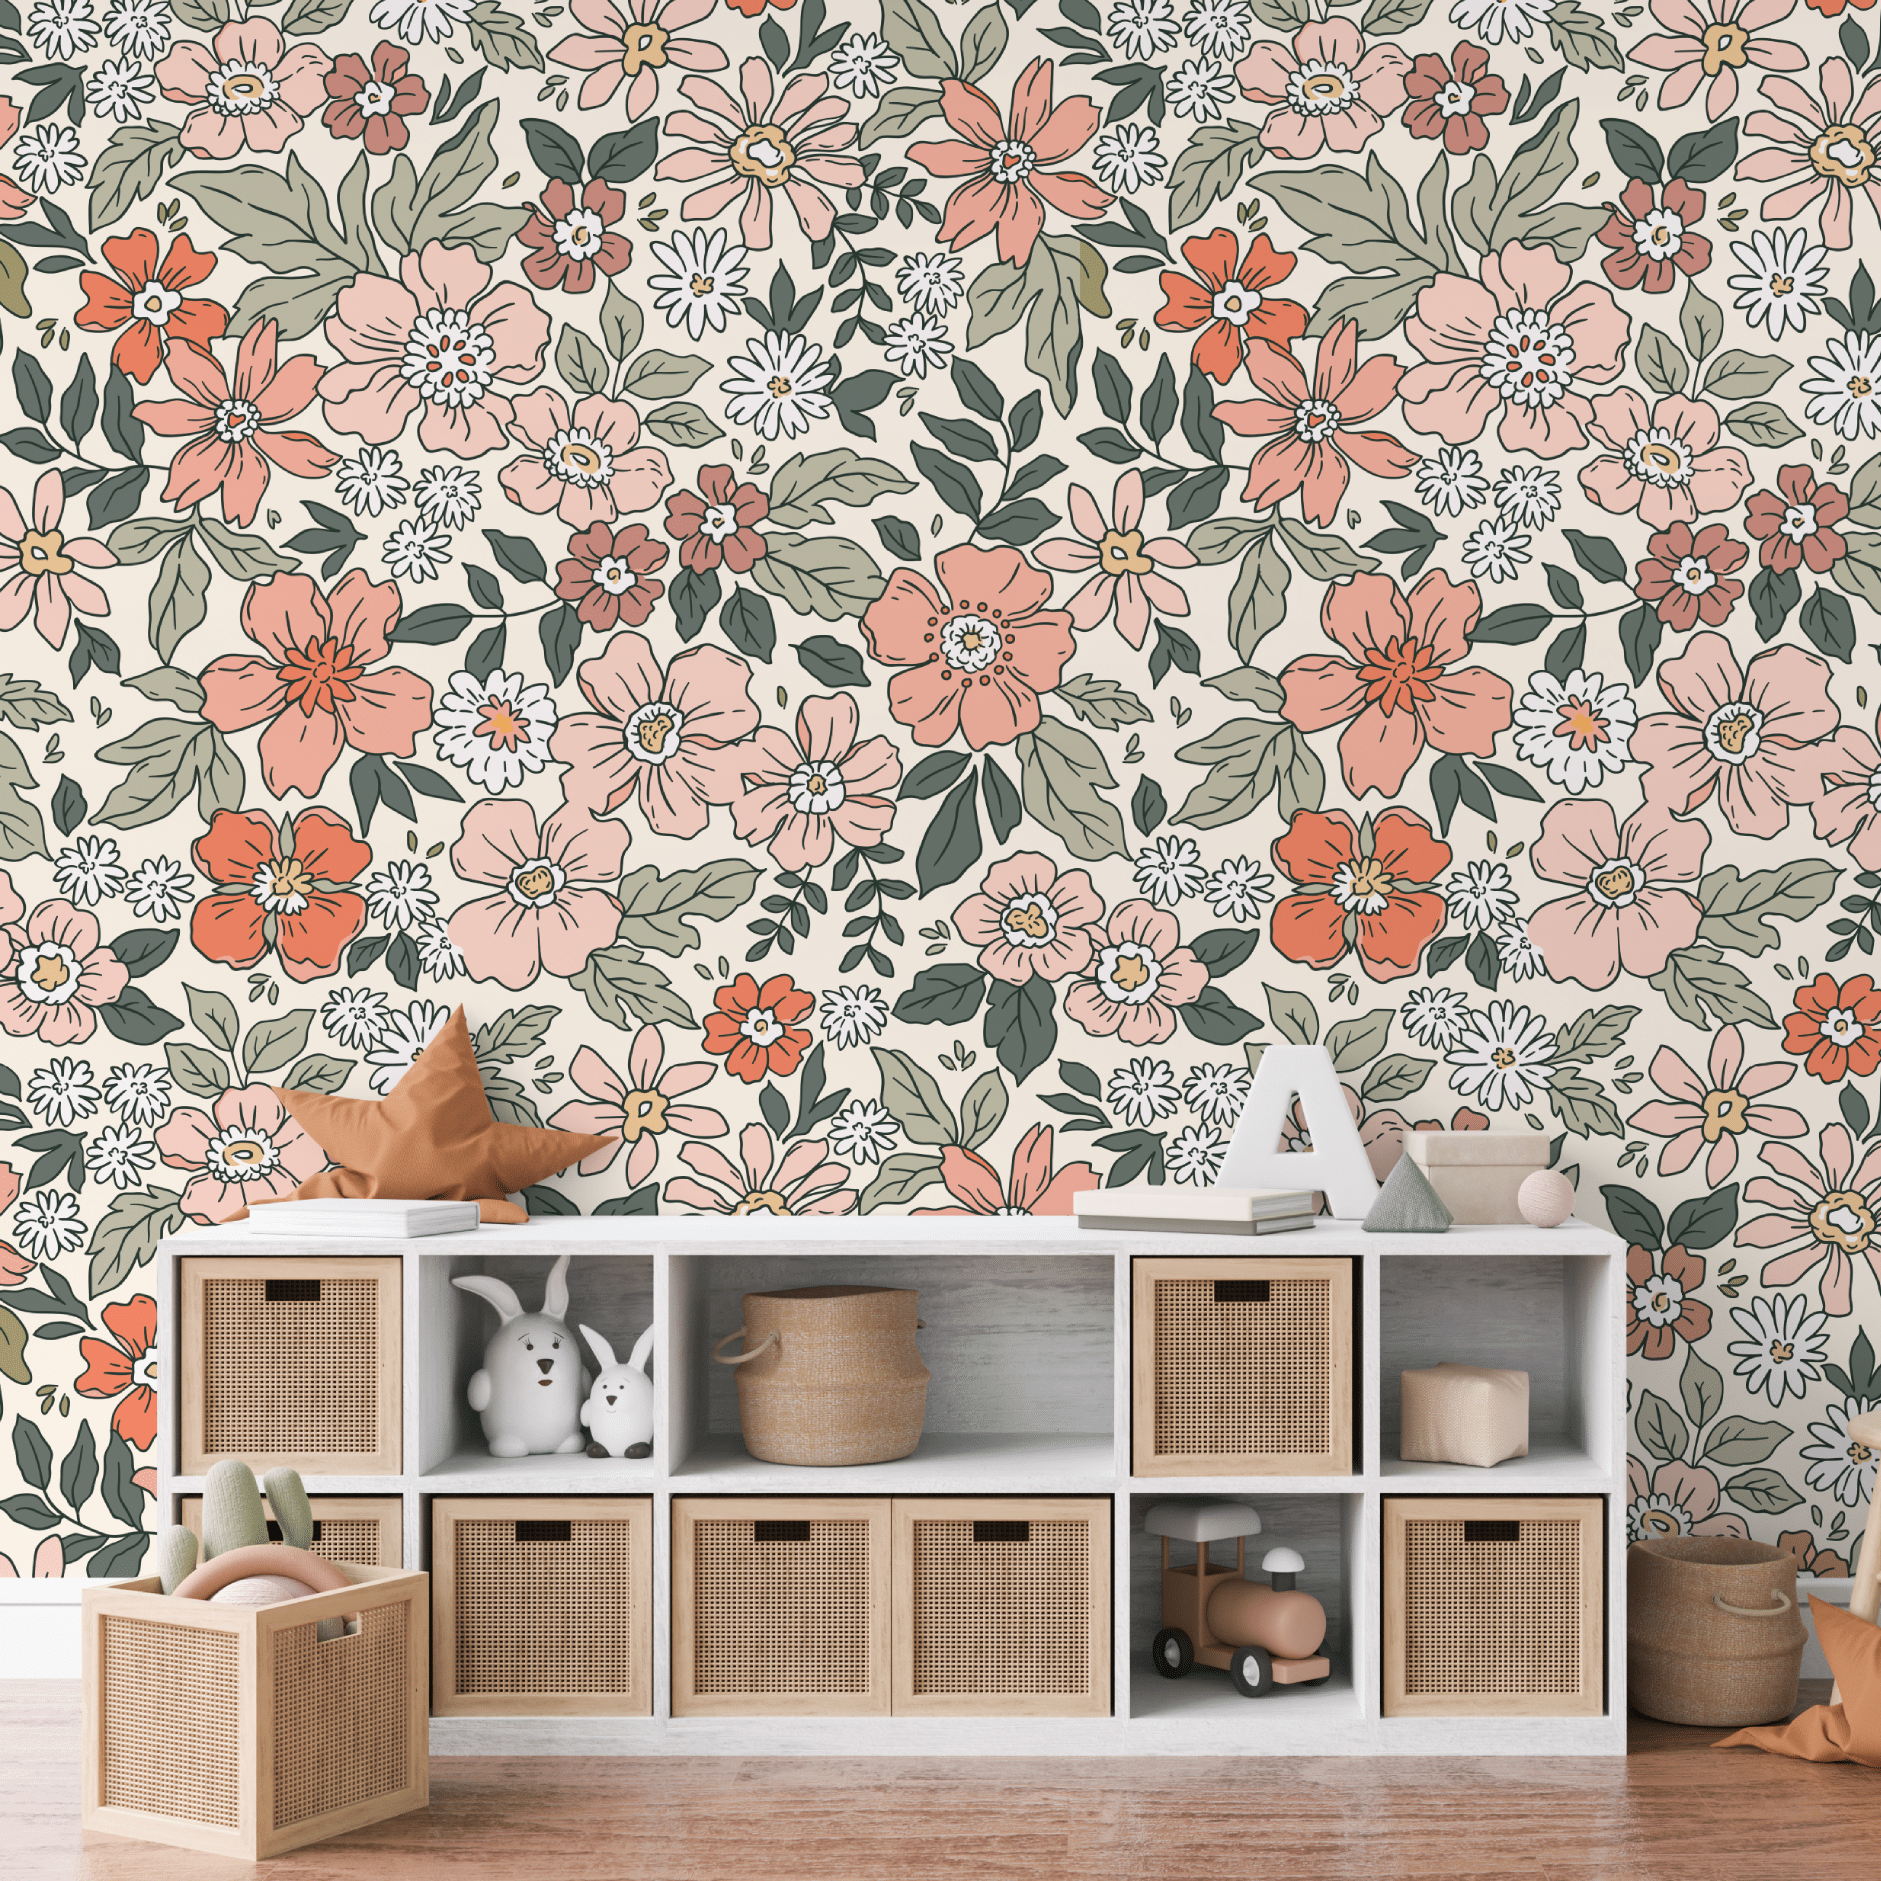 Harmony Ecletic Floral Wallpaper